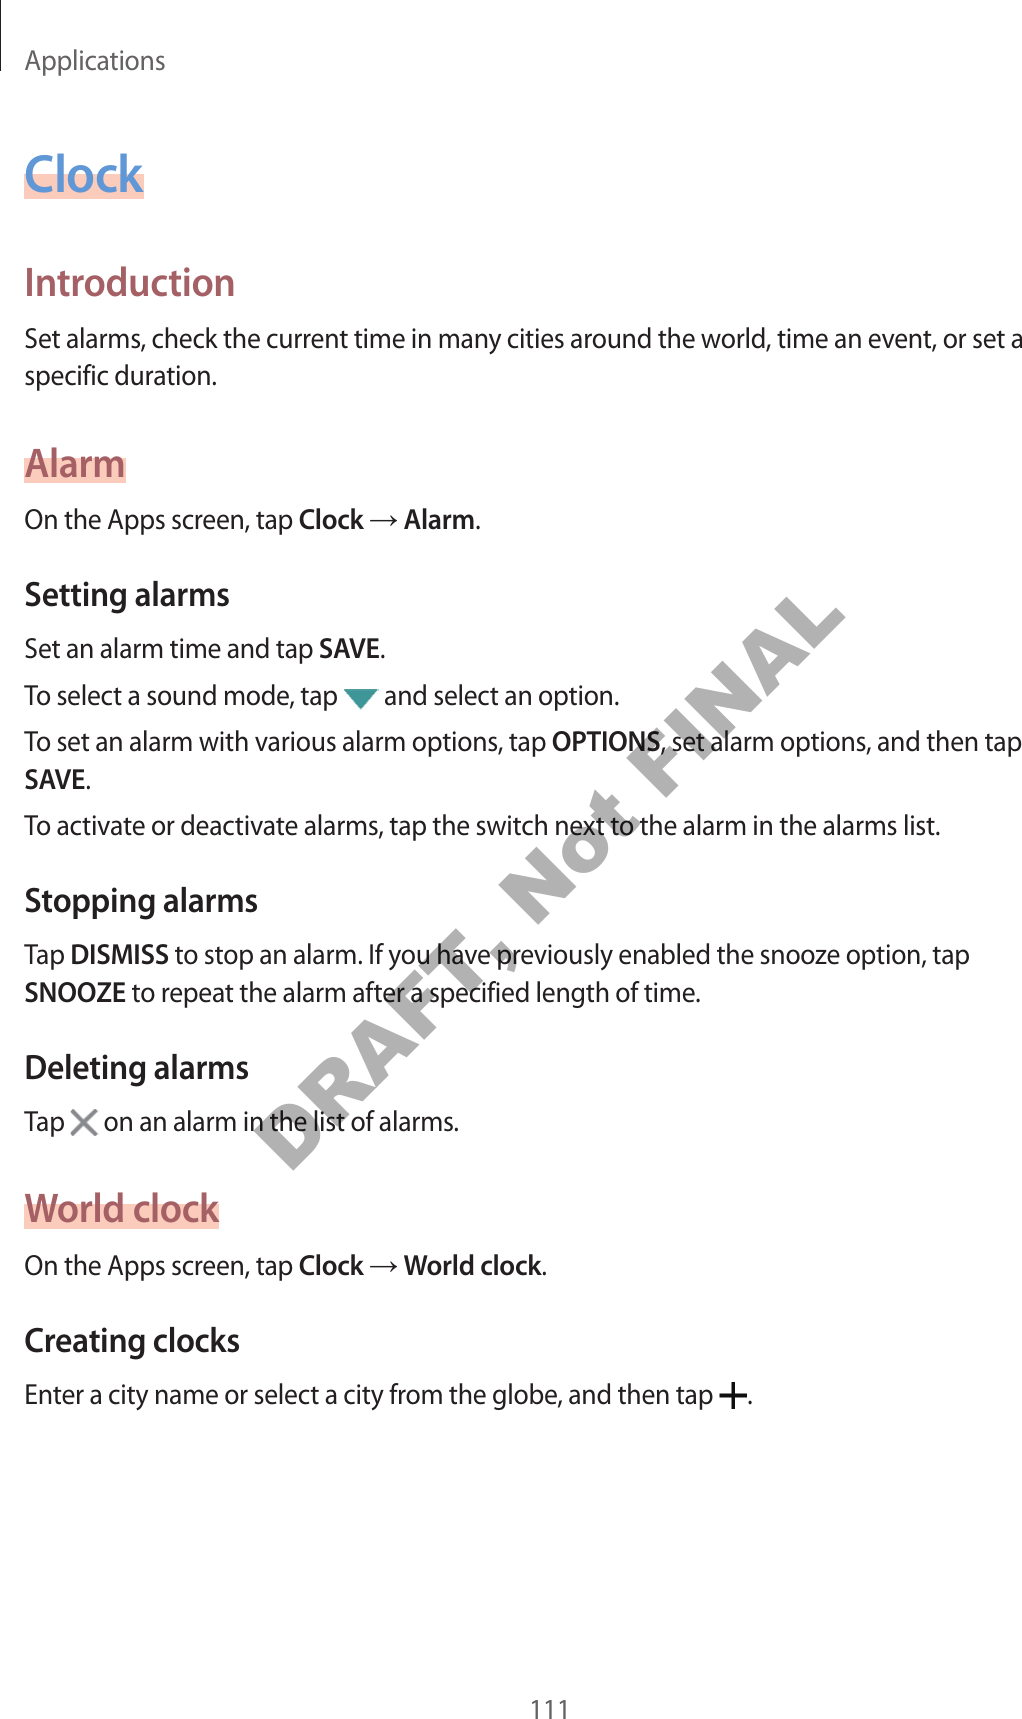 Applications111ClockIntroductionSet alarms, check the current time in man y cities ar ound the w orld , time an ev ent, or set a specific duration.AlarmOn the Apps screen, tap Clock  Alarm.Setting alarmsSet an alarm time and tap SAVE.To select a sound mode, tap   and select an option.To set an alarm with various alarm options, tap OPTIONS, set alarm options, and then tap SAVE.To activate or deactivate alarms, tap the switch ne xt to the alarm in the alarms list.Stopping alarmsTap DISMISS to stop an alarm. If you hav e pr eviously enabled the snoo z e option, tap SNOOZE to repea t the alarm after a specified length of time.Deleting alarmsTap   on an alarm in the list of alarms.World clockOn the Apps screen, tap Clock  World clock.Crea ting clocksEnter a city name or select a city from the globe , and then tap  .DRAFT, Not FINAL